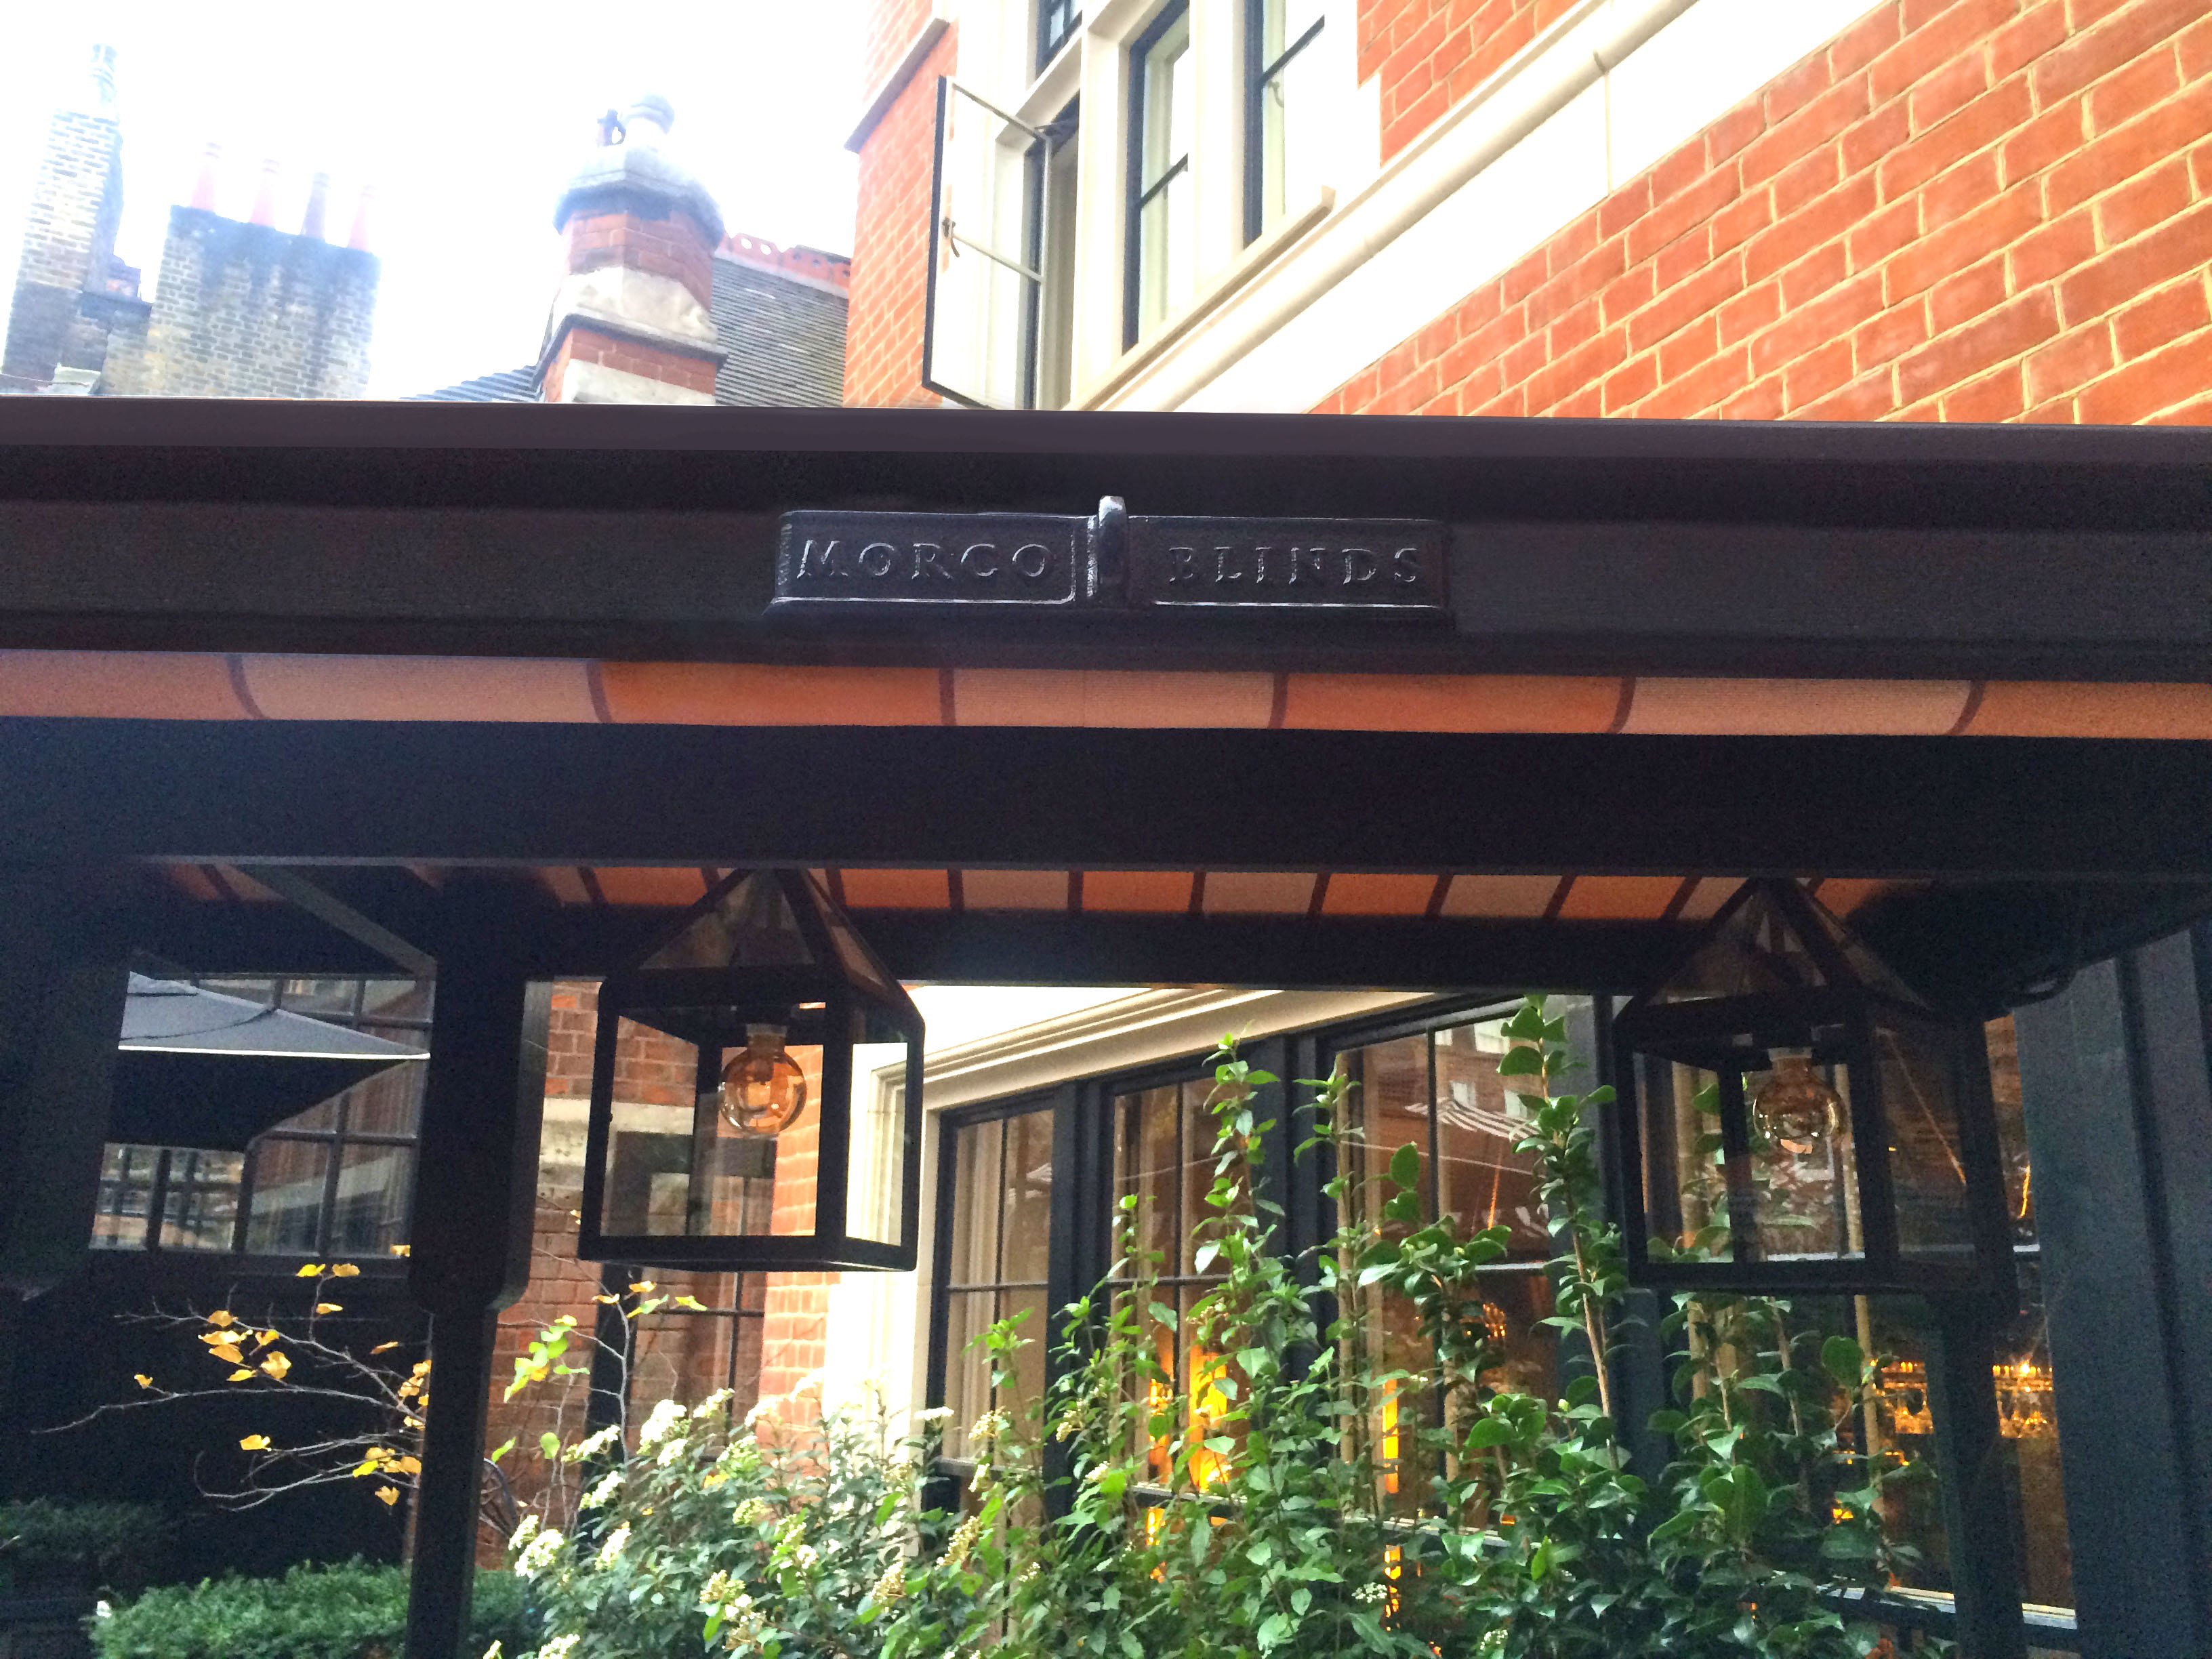 Traditional awning on Oyster cart